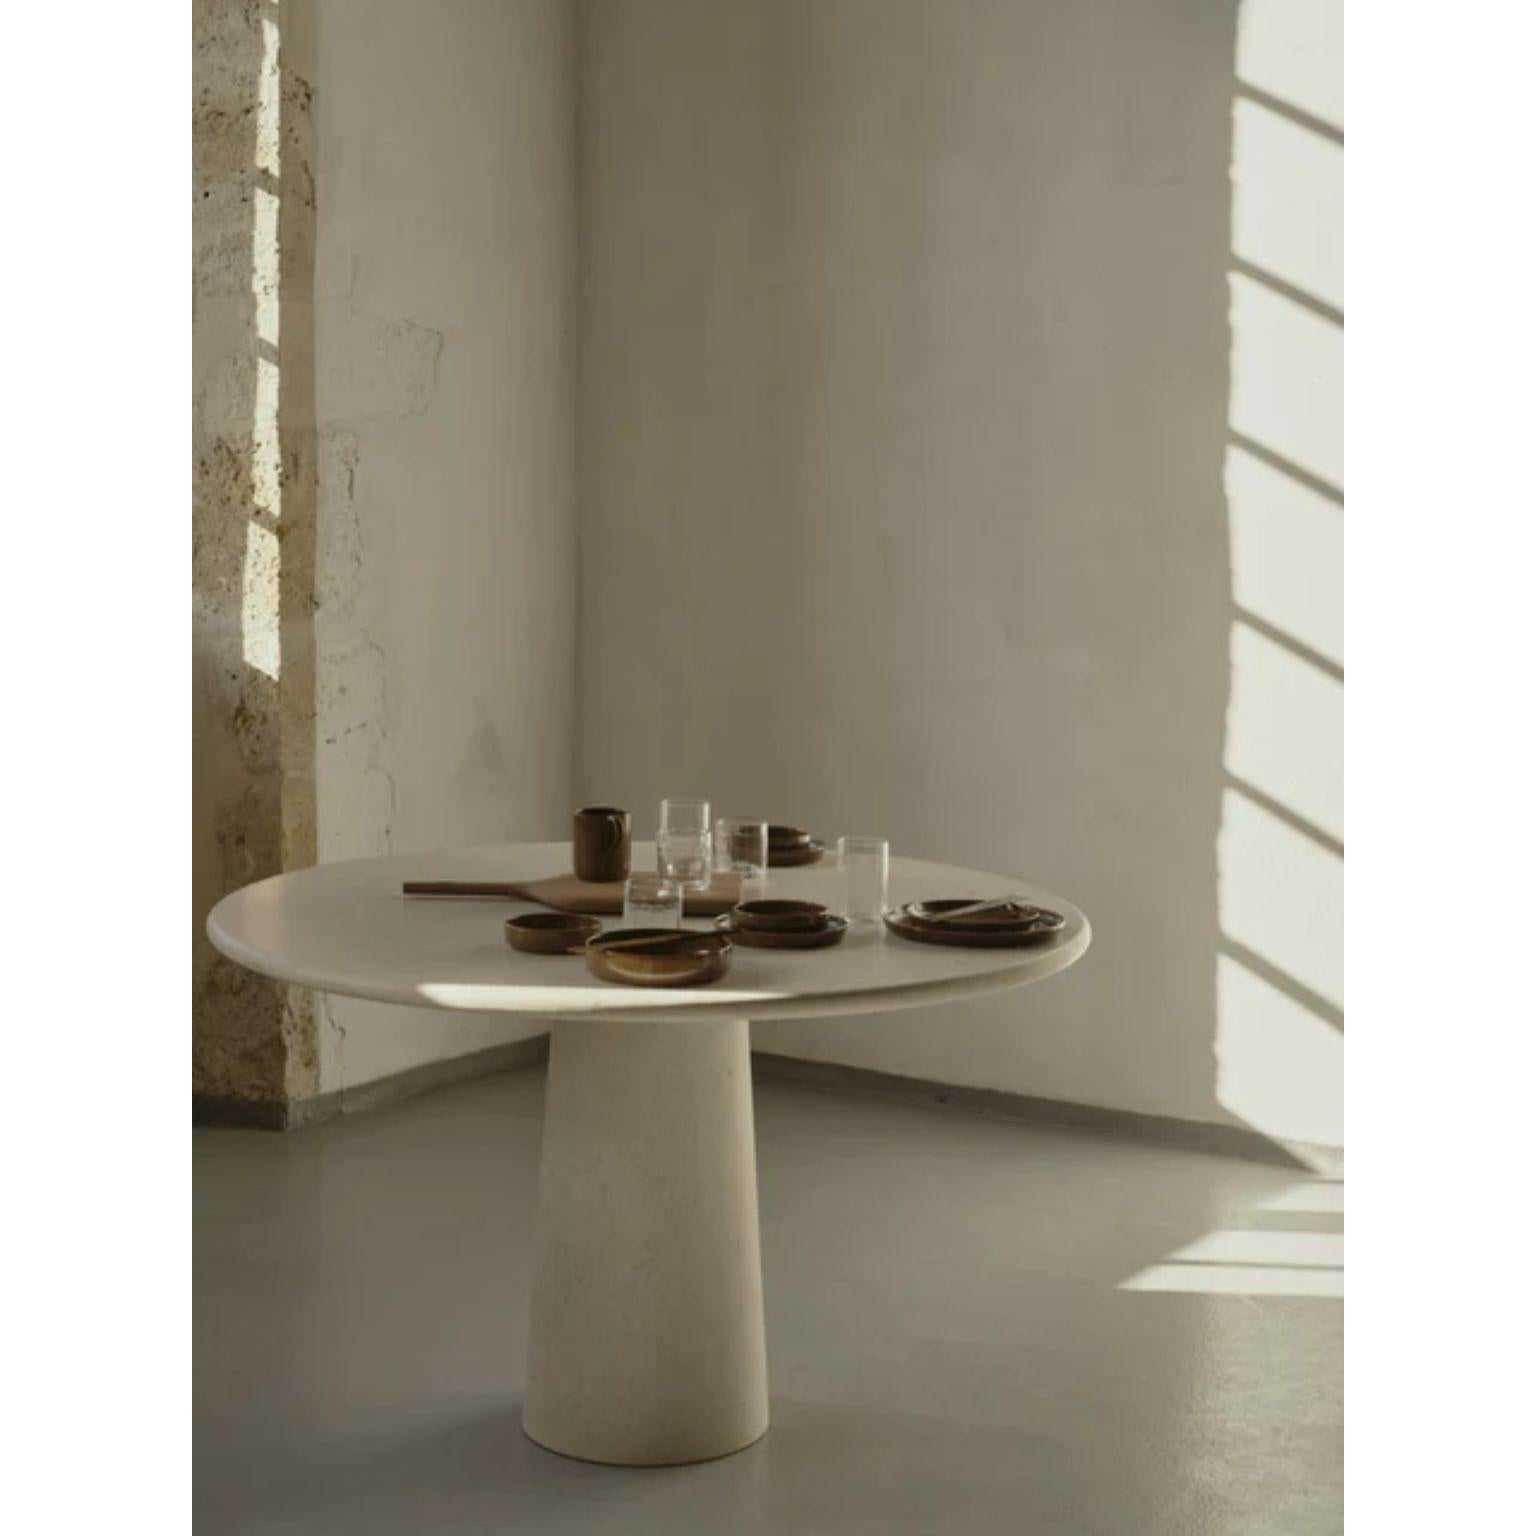 Donoma Buffon 5 Dinner Table by La Lune
Dimensions: Ø 120 x H 73 cm.
Materials: Buffon 5 Burgundy stone. 

Produced in France. Anti-stain treatment. Custom sizes available. Different finishes are available. Please contact us.

La Lune is above all a